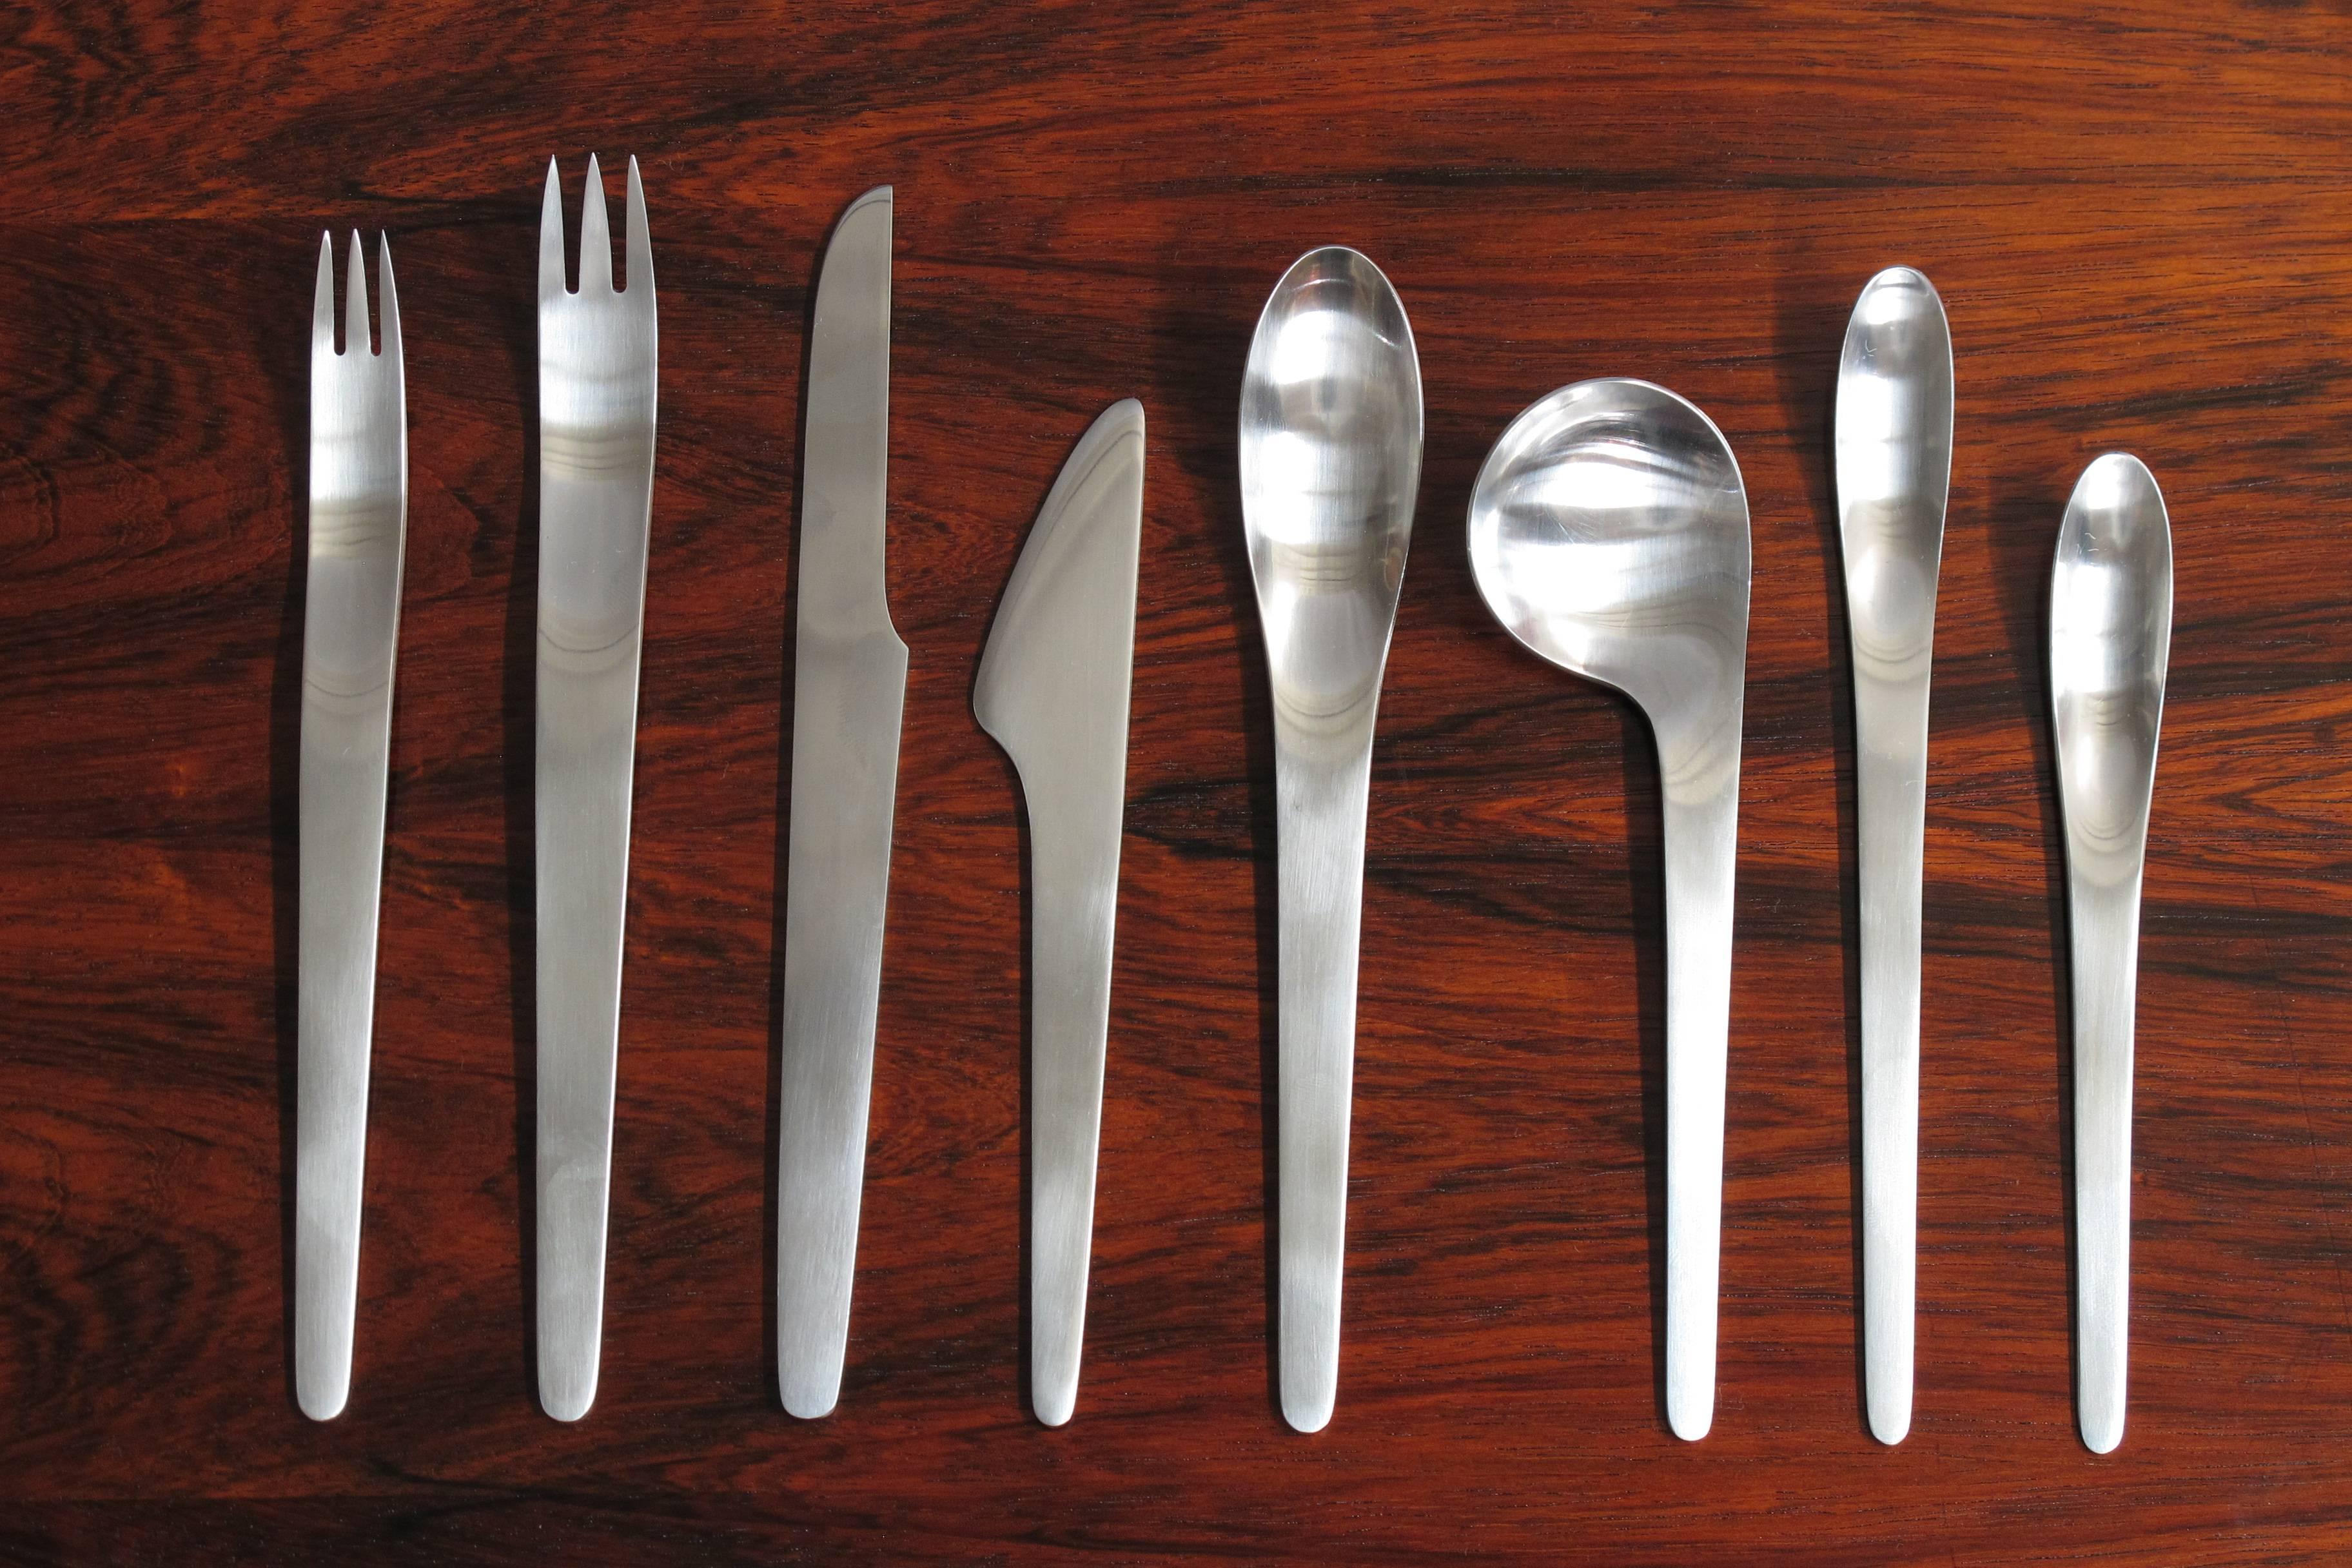 Stainless flatware service for eight designed by Arne Jacobsen, model '660' flatware was designed for use in the Royal Copenhagen Hotel in 1957 and initially manufactured by A. Michelsen. This is a complete set of 77 pieces. Each piece wrapped in A